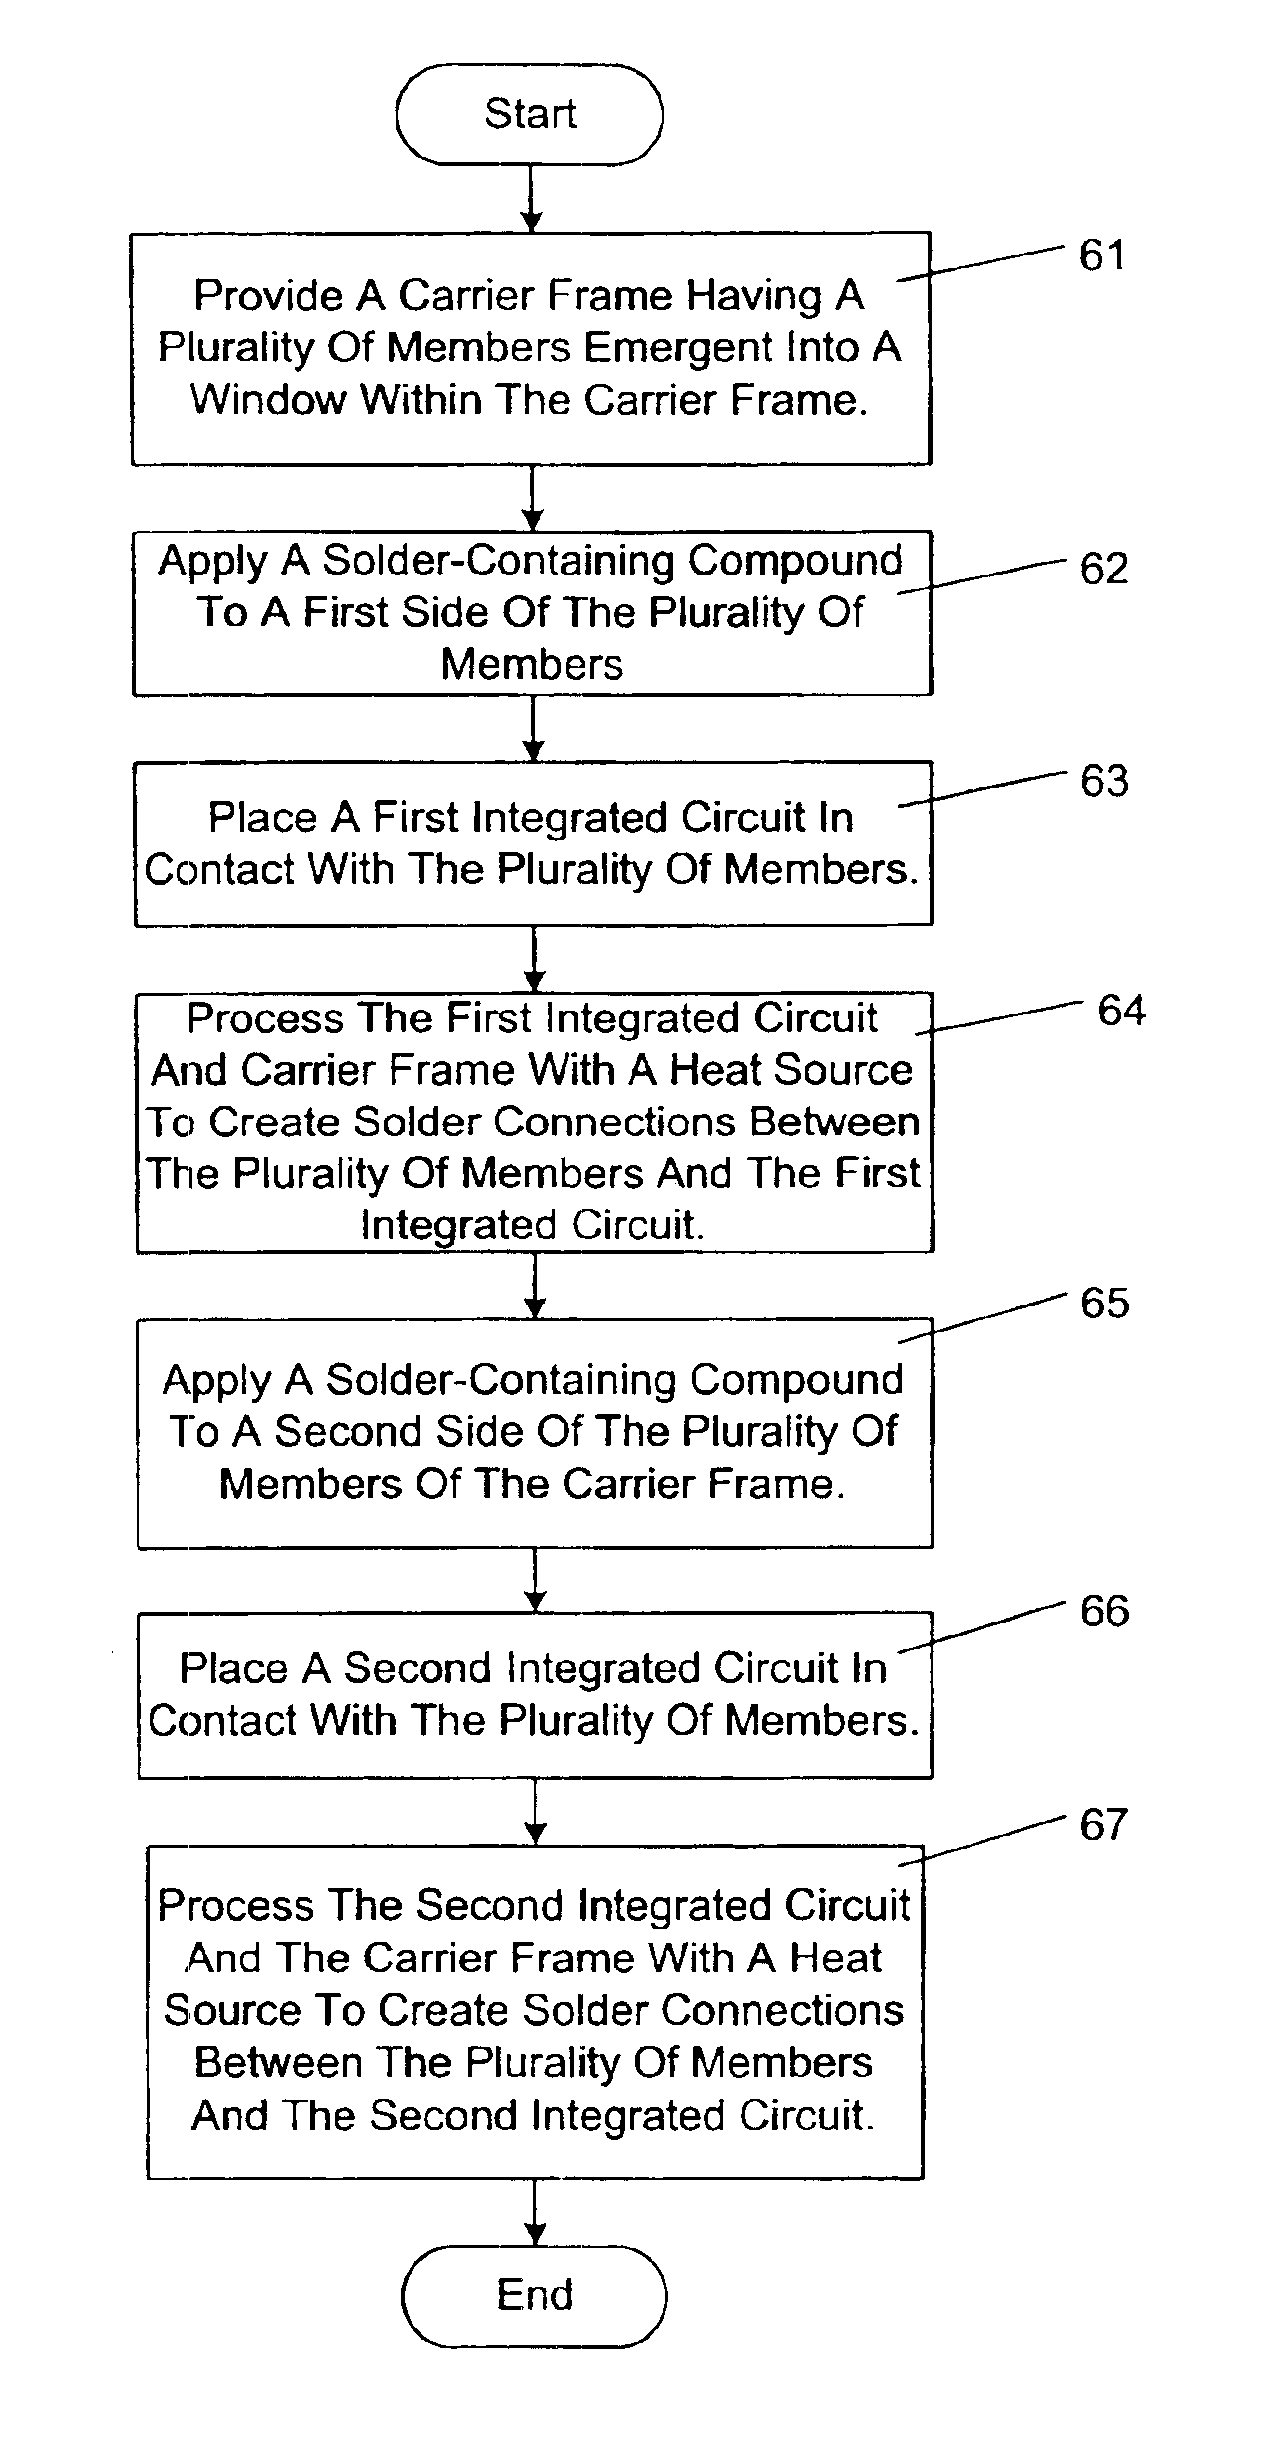 Contact member stacking system and method